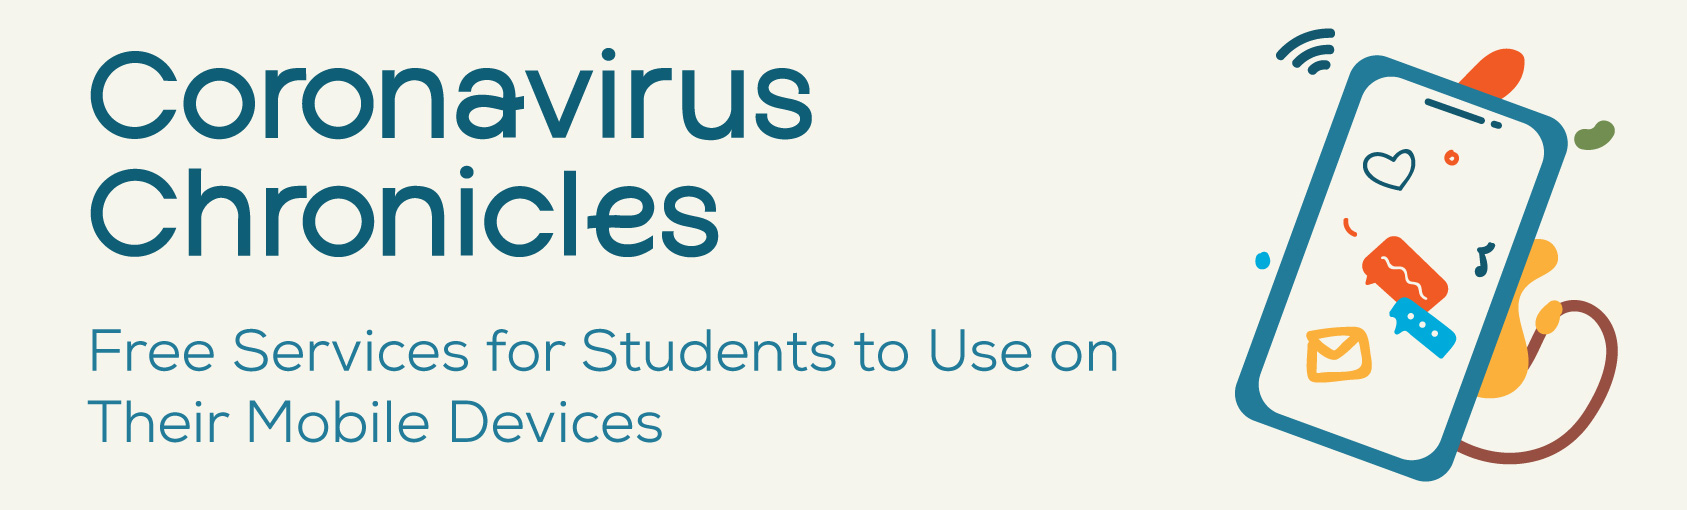 The Coronavirus Chronicles: Free Services for Students to Use on Their Mobile Devices banner